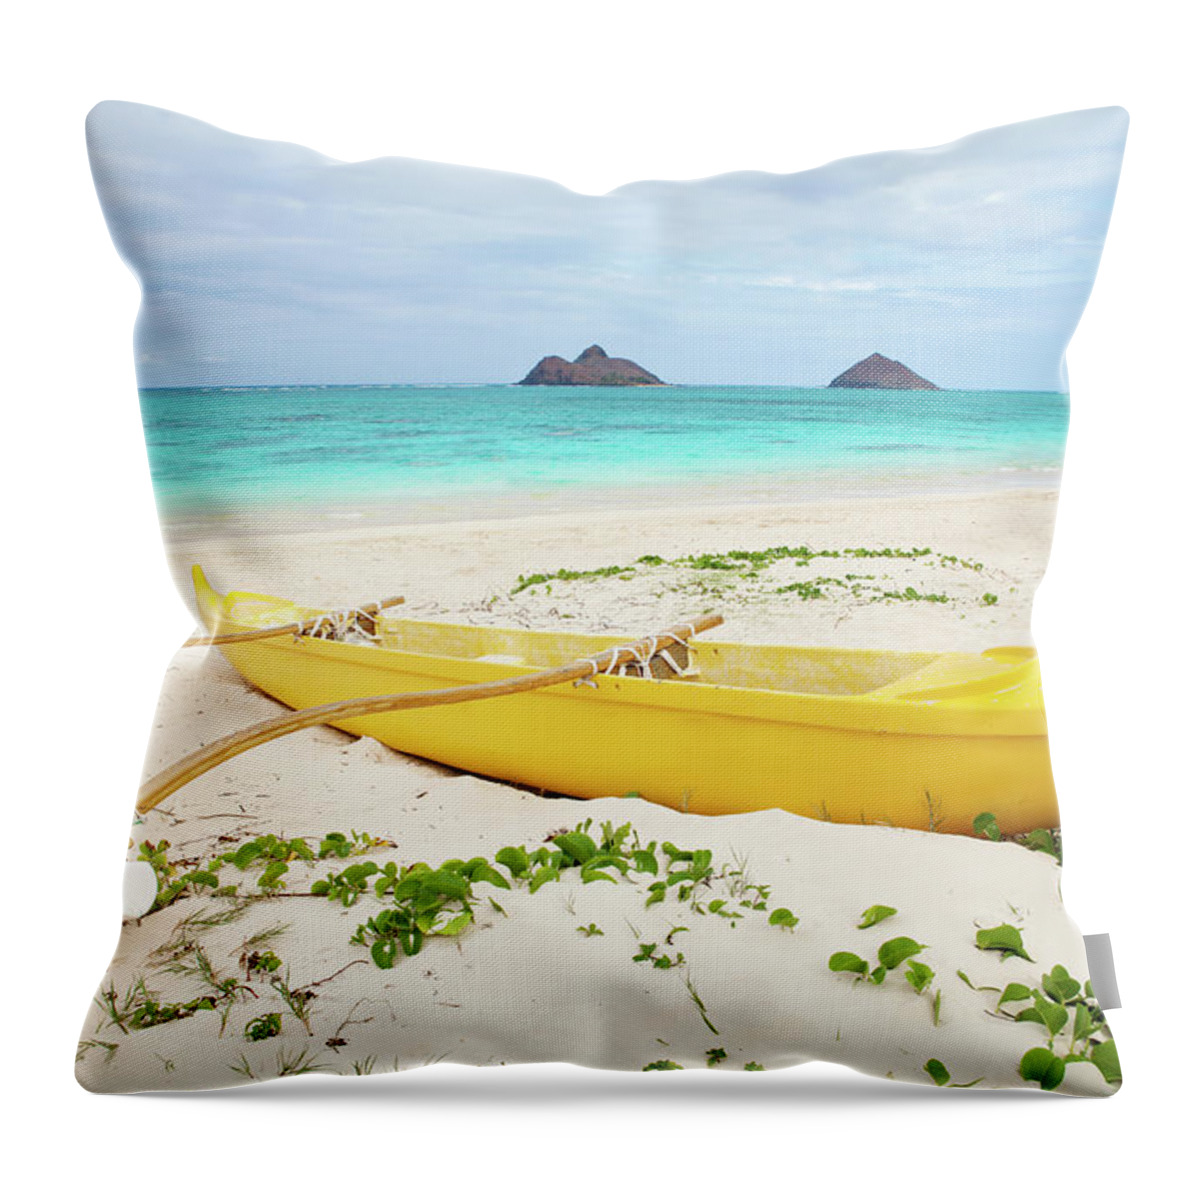 Scenics Throw Pillow featuring the photograph Outrigger Canoe Lanikai Beach by M Swiet Productions